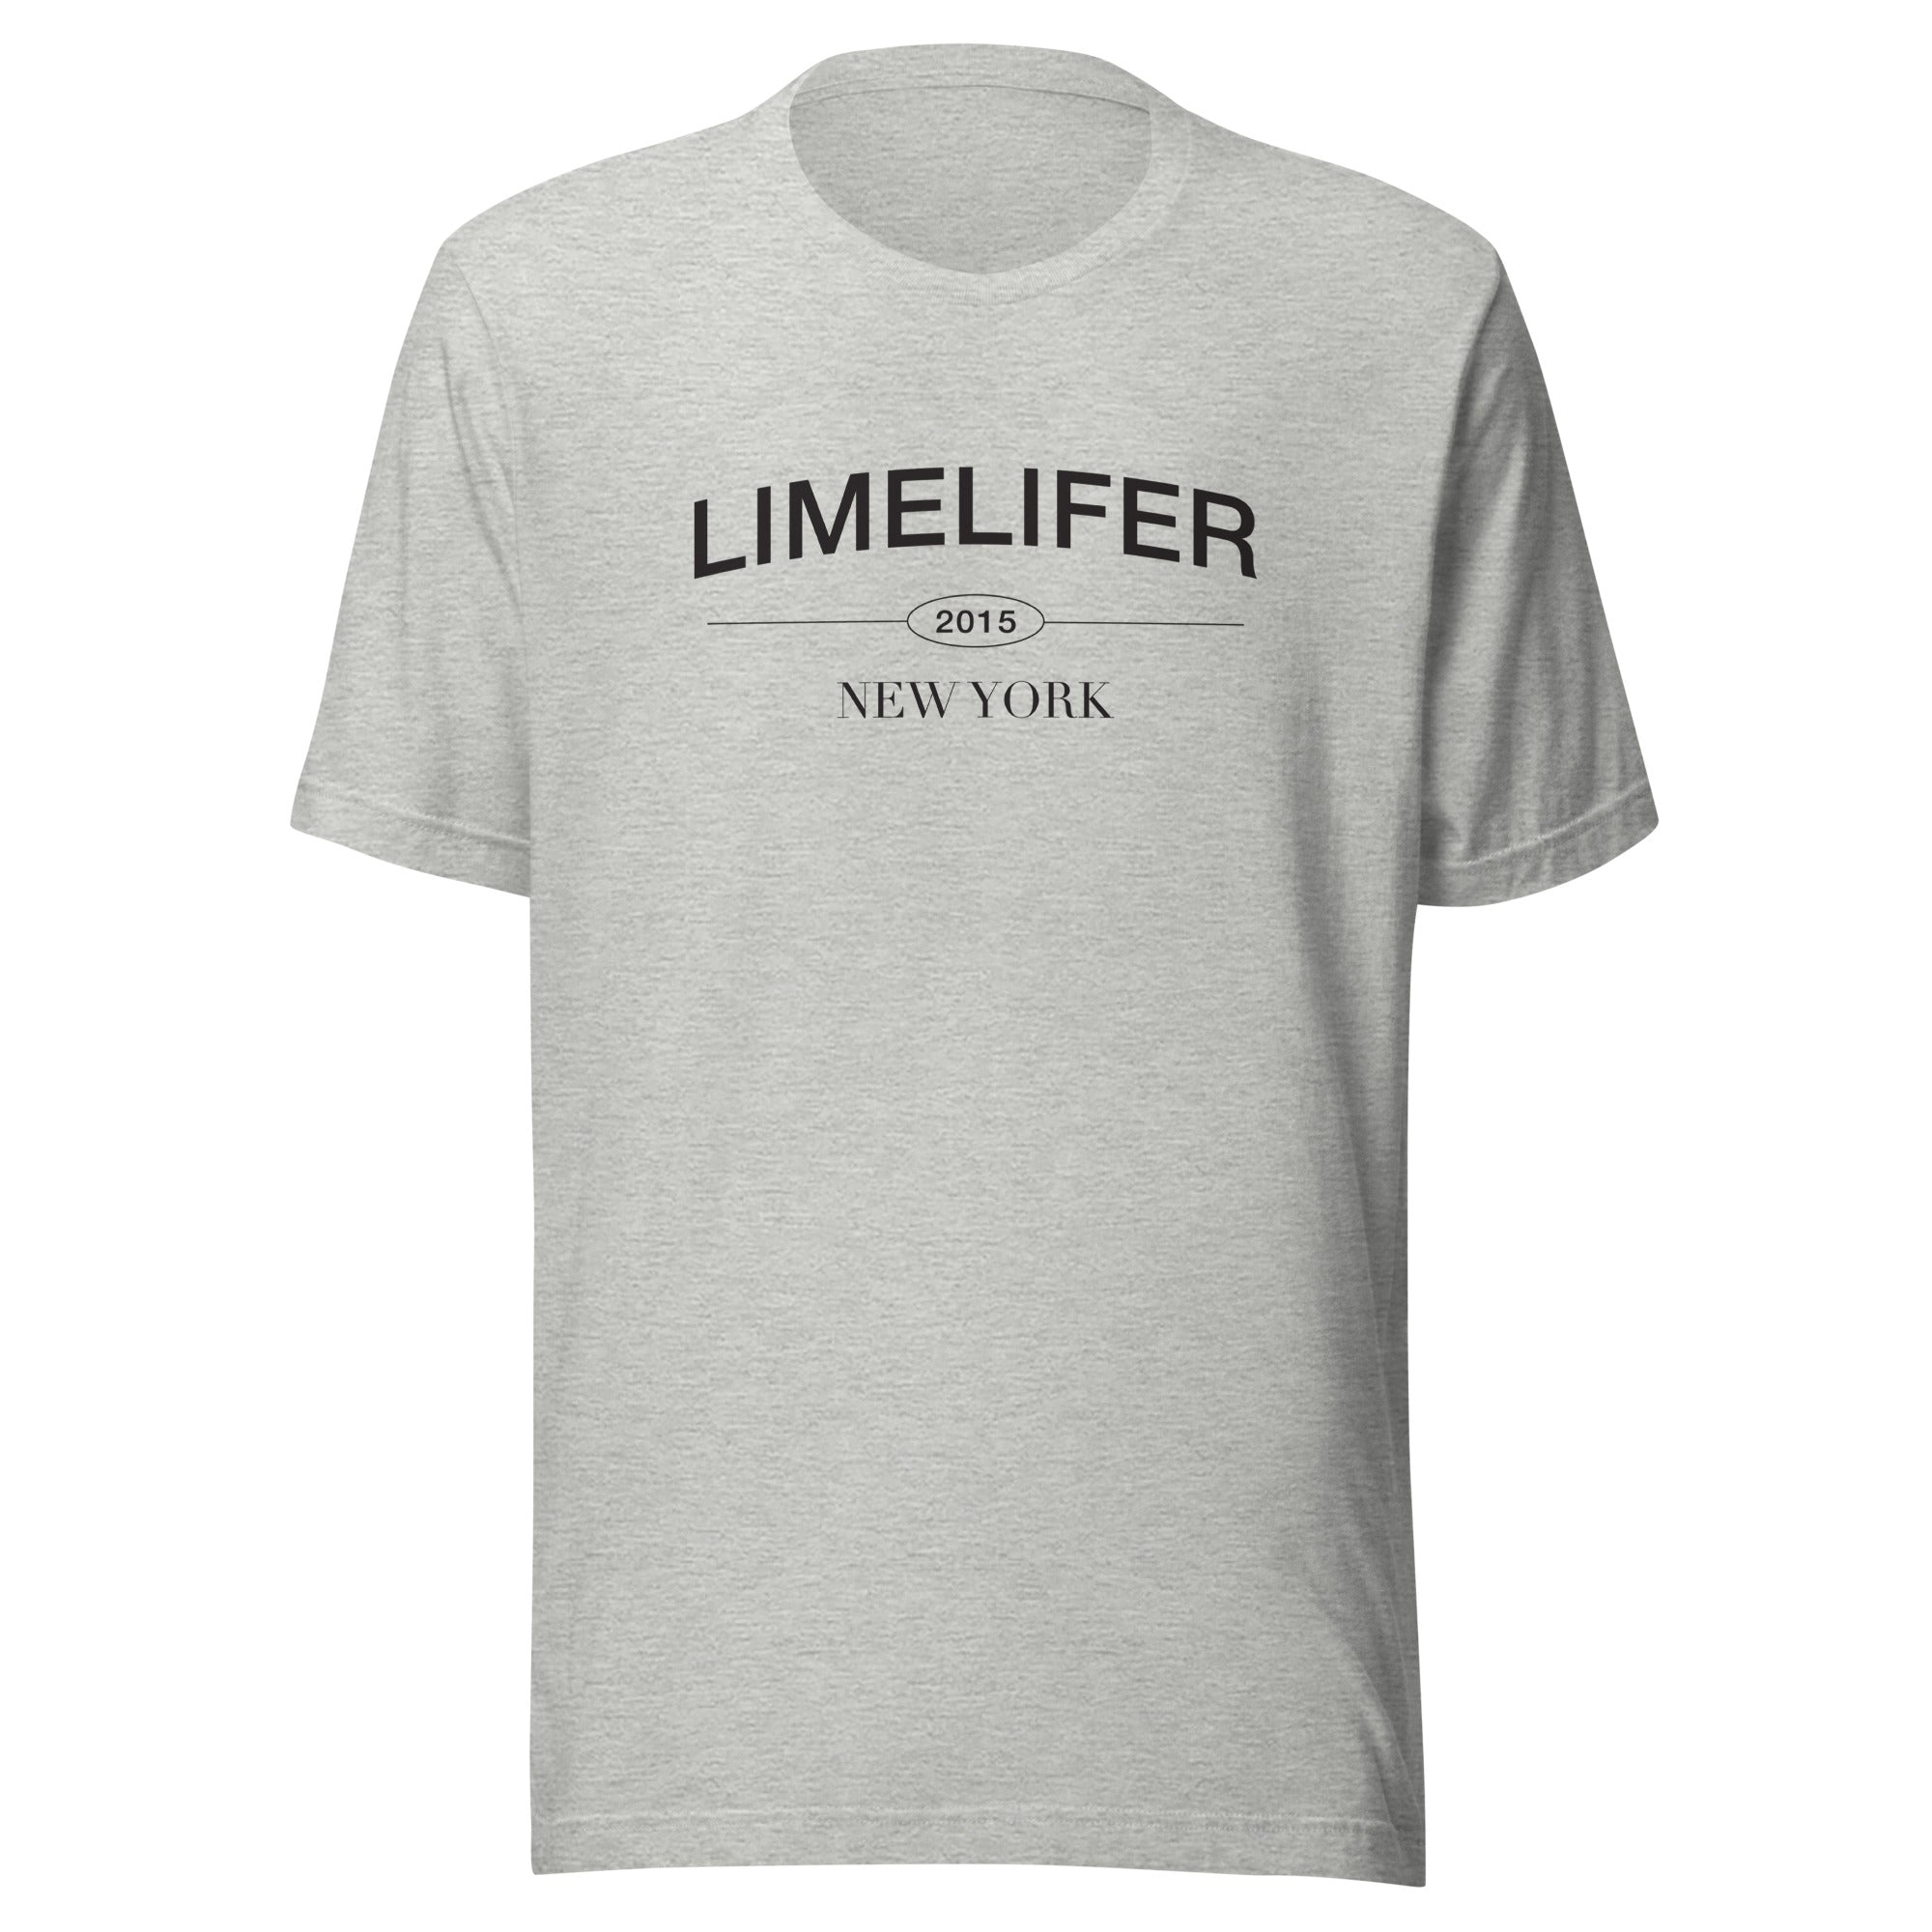 LIMELIFER NY - Unisex t-shirt in White, Athletic Heather and Light Blue